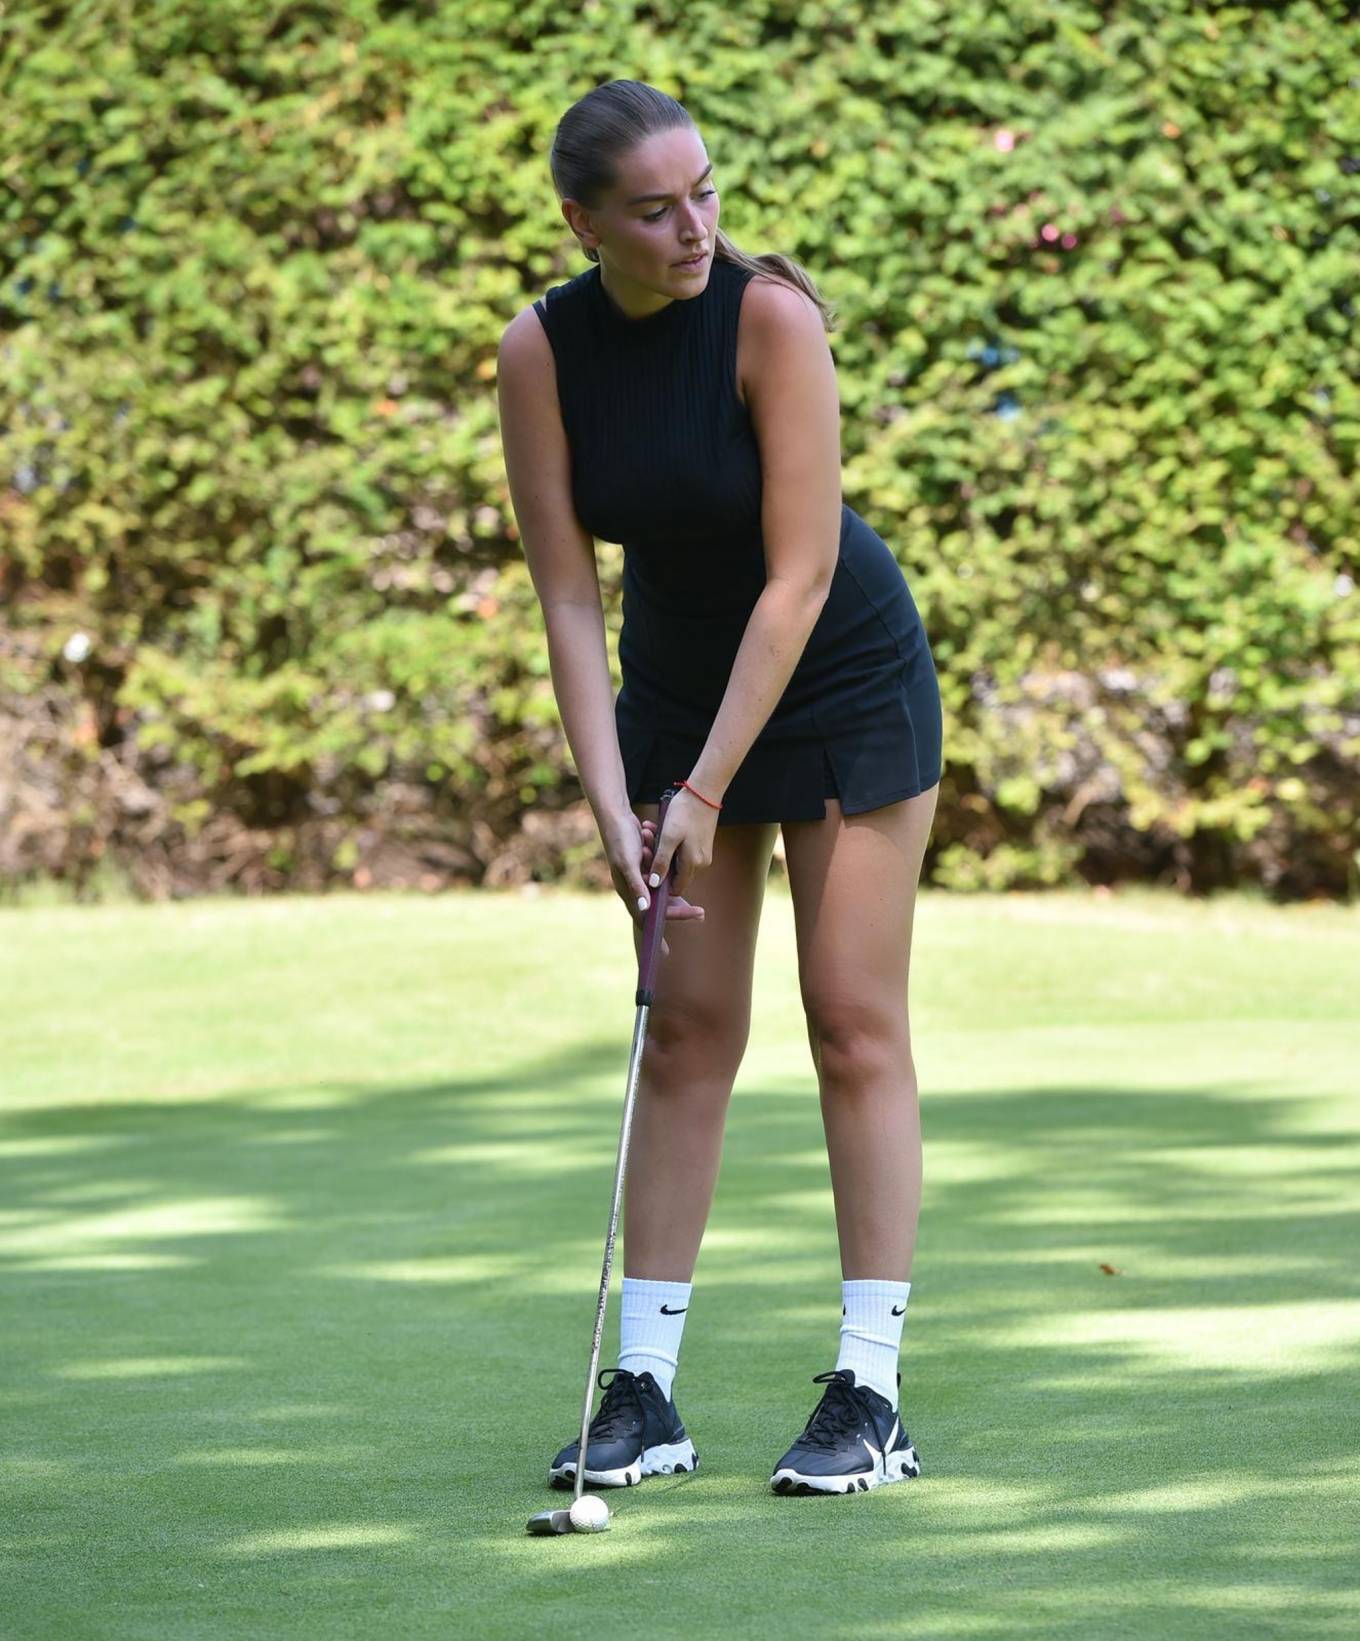 Chloe Ross - Learning how to play golf at Romford golf club in Essex